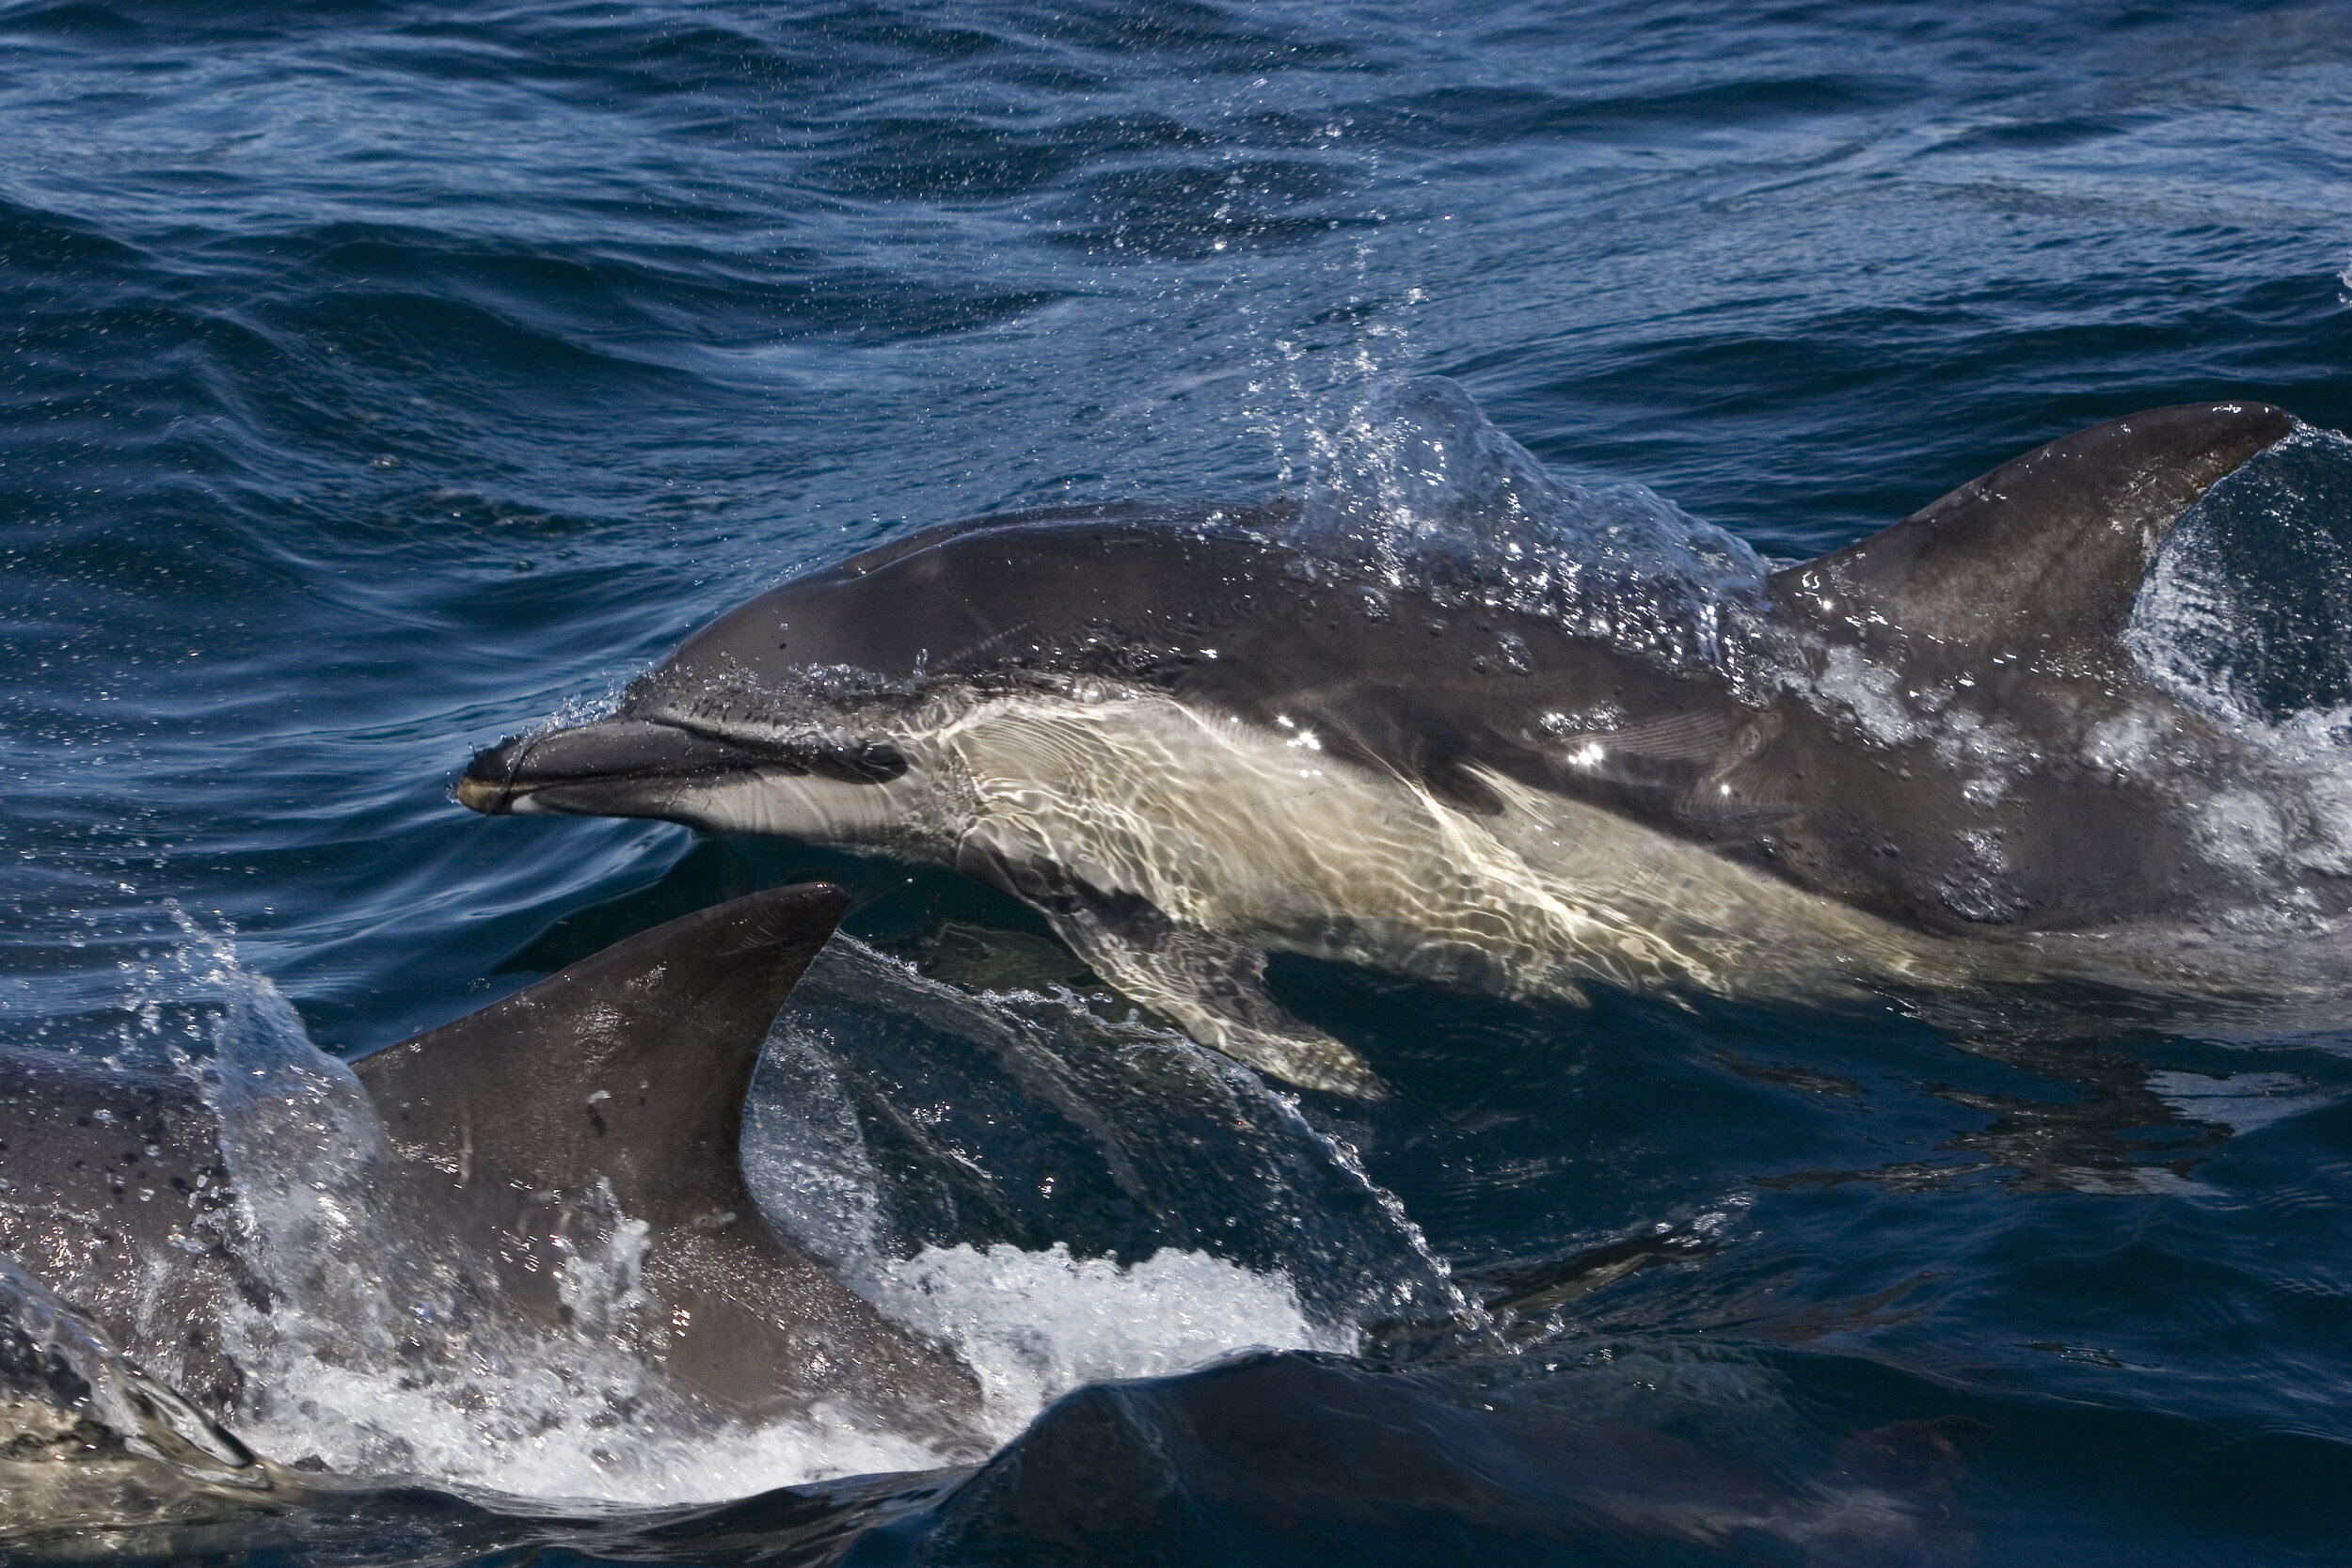 HWDT copyright_Common dolphins.JPG